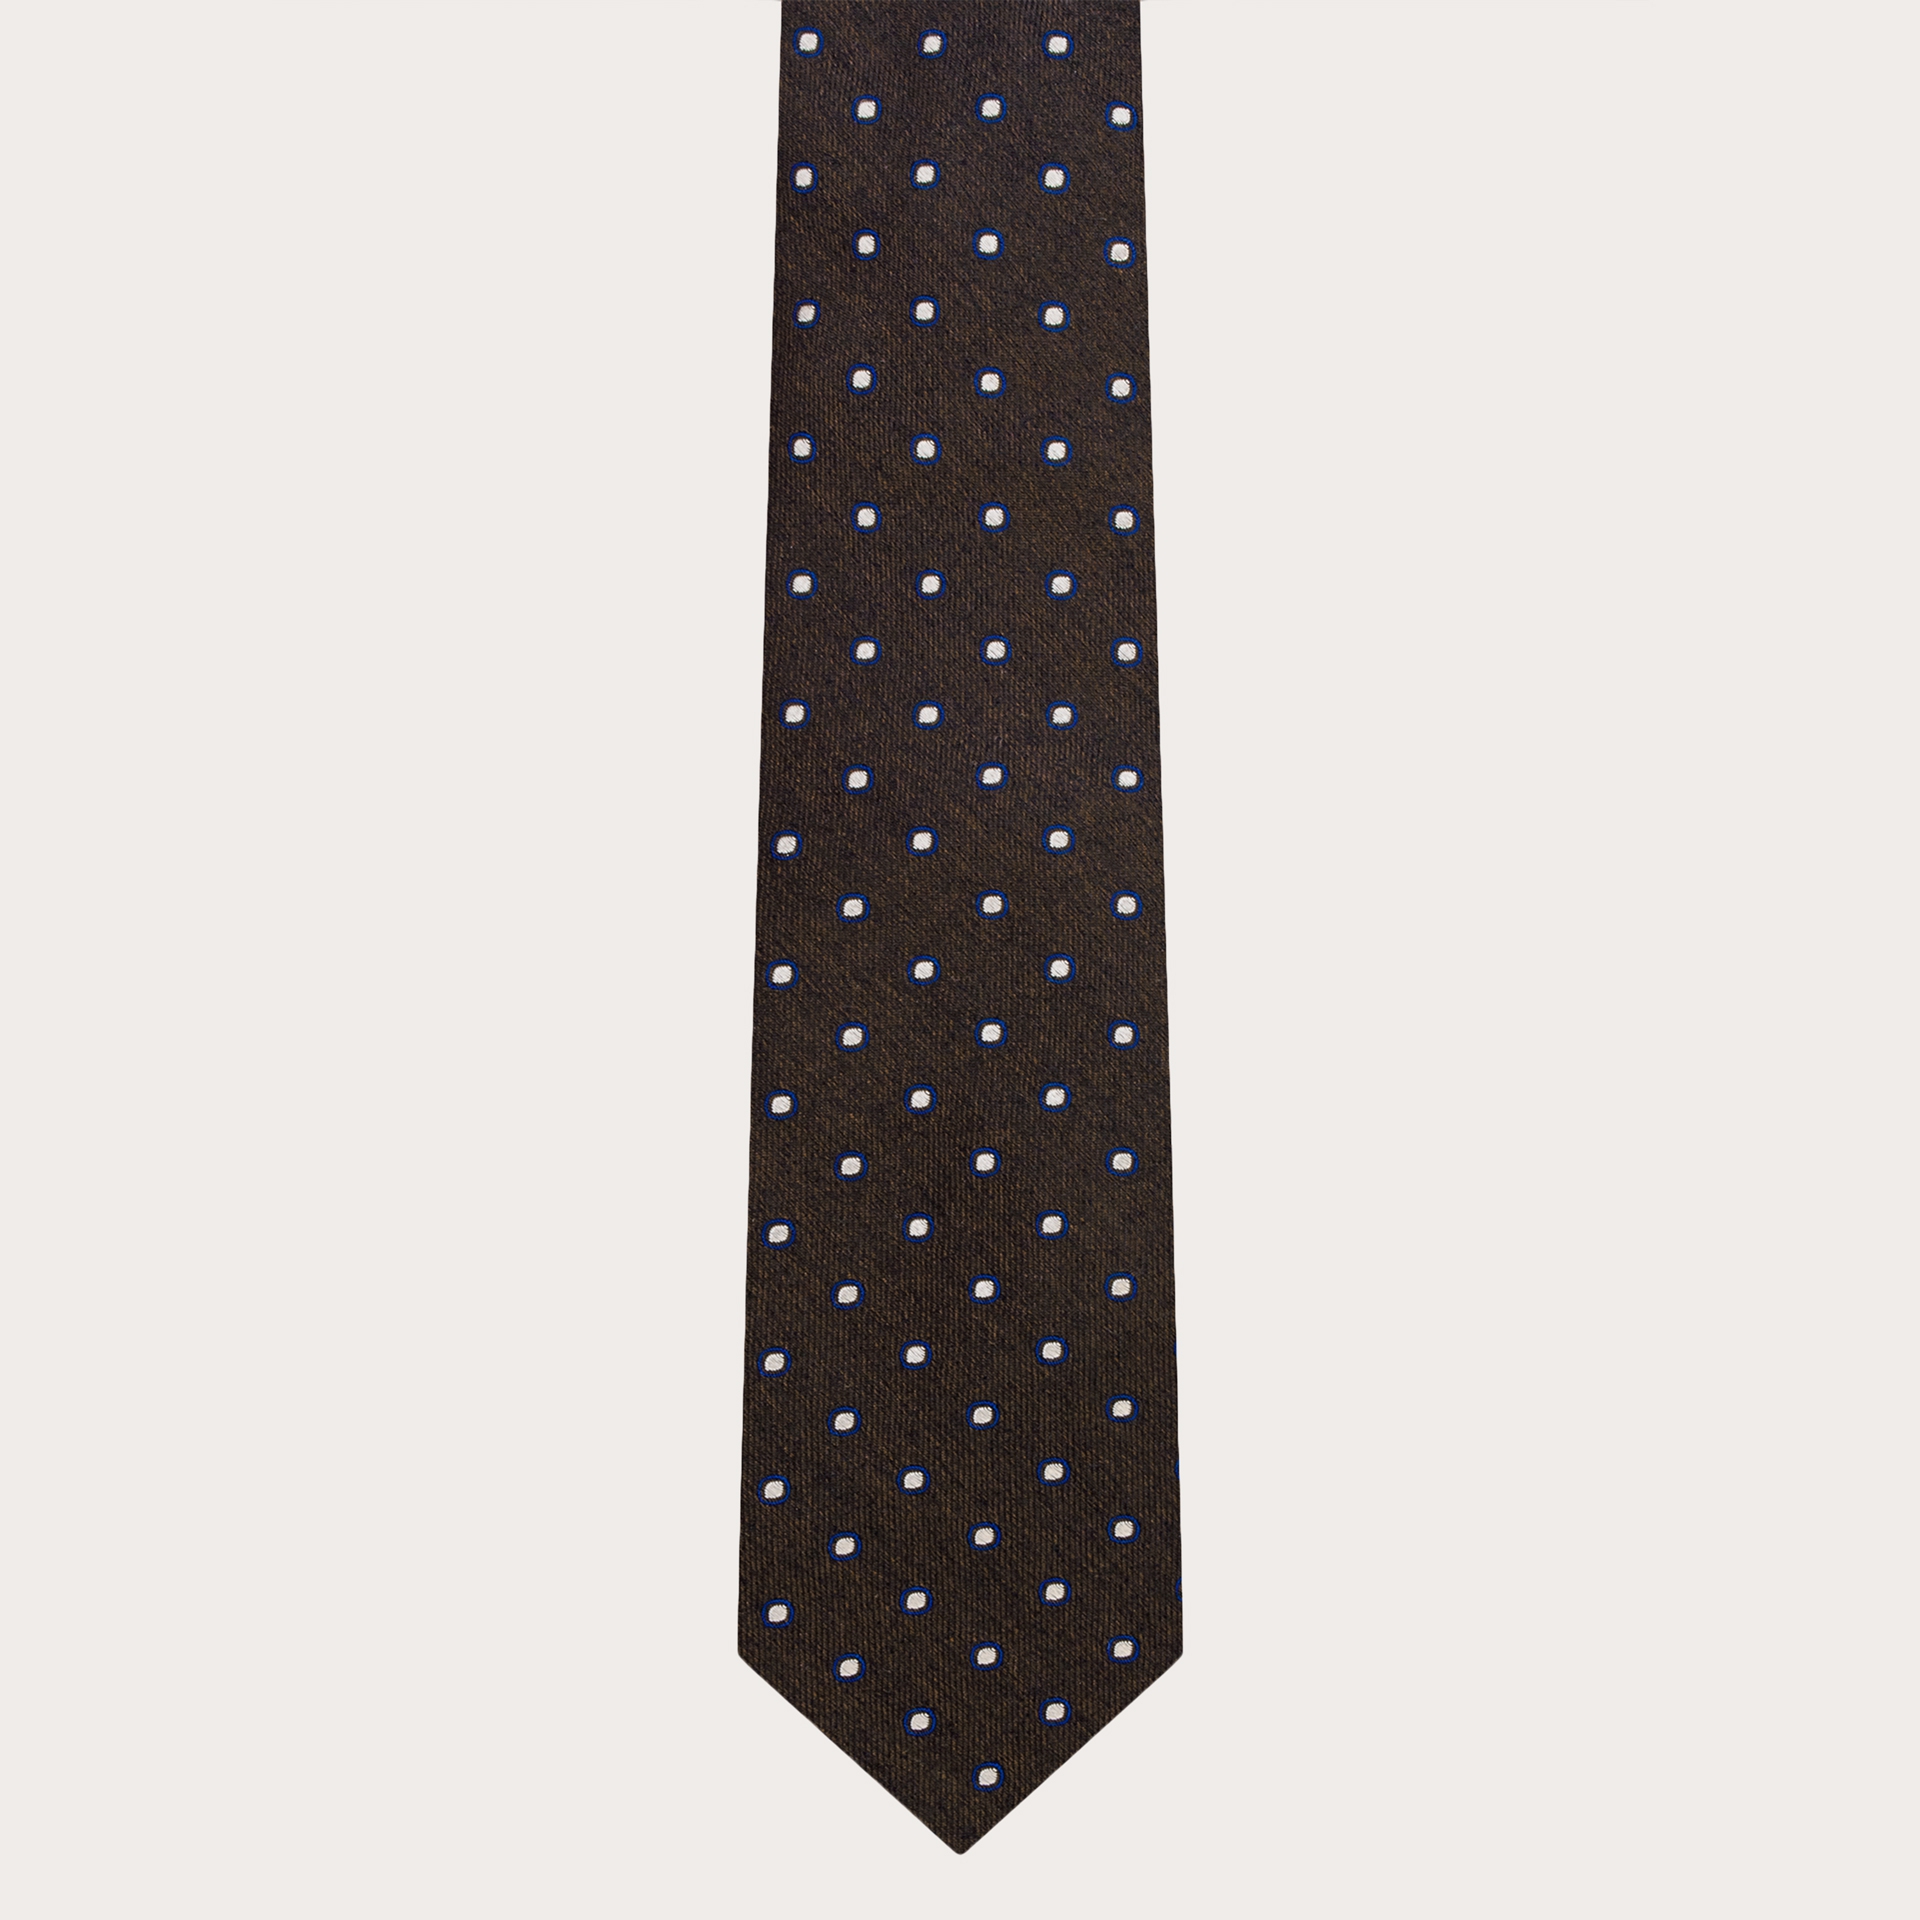 Necktie in jacquard silk, brown with polka dots